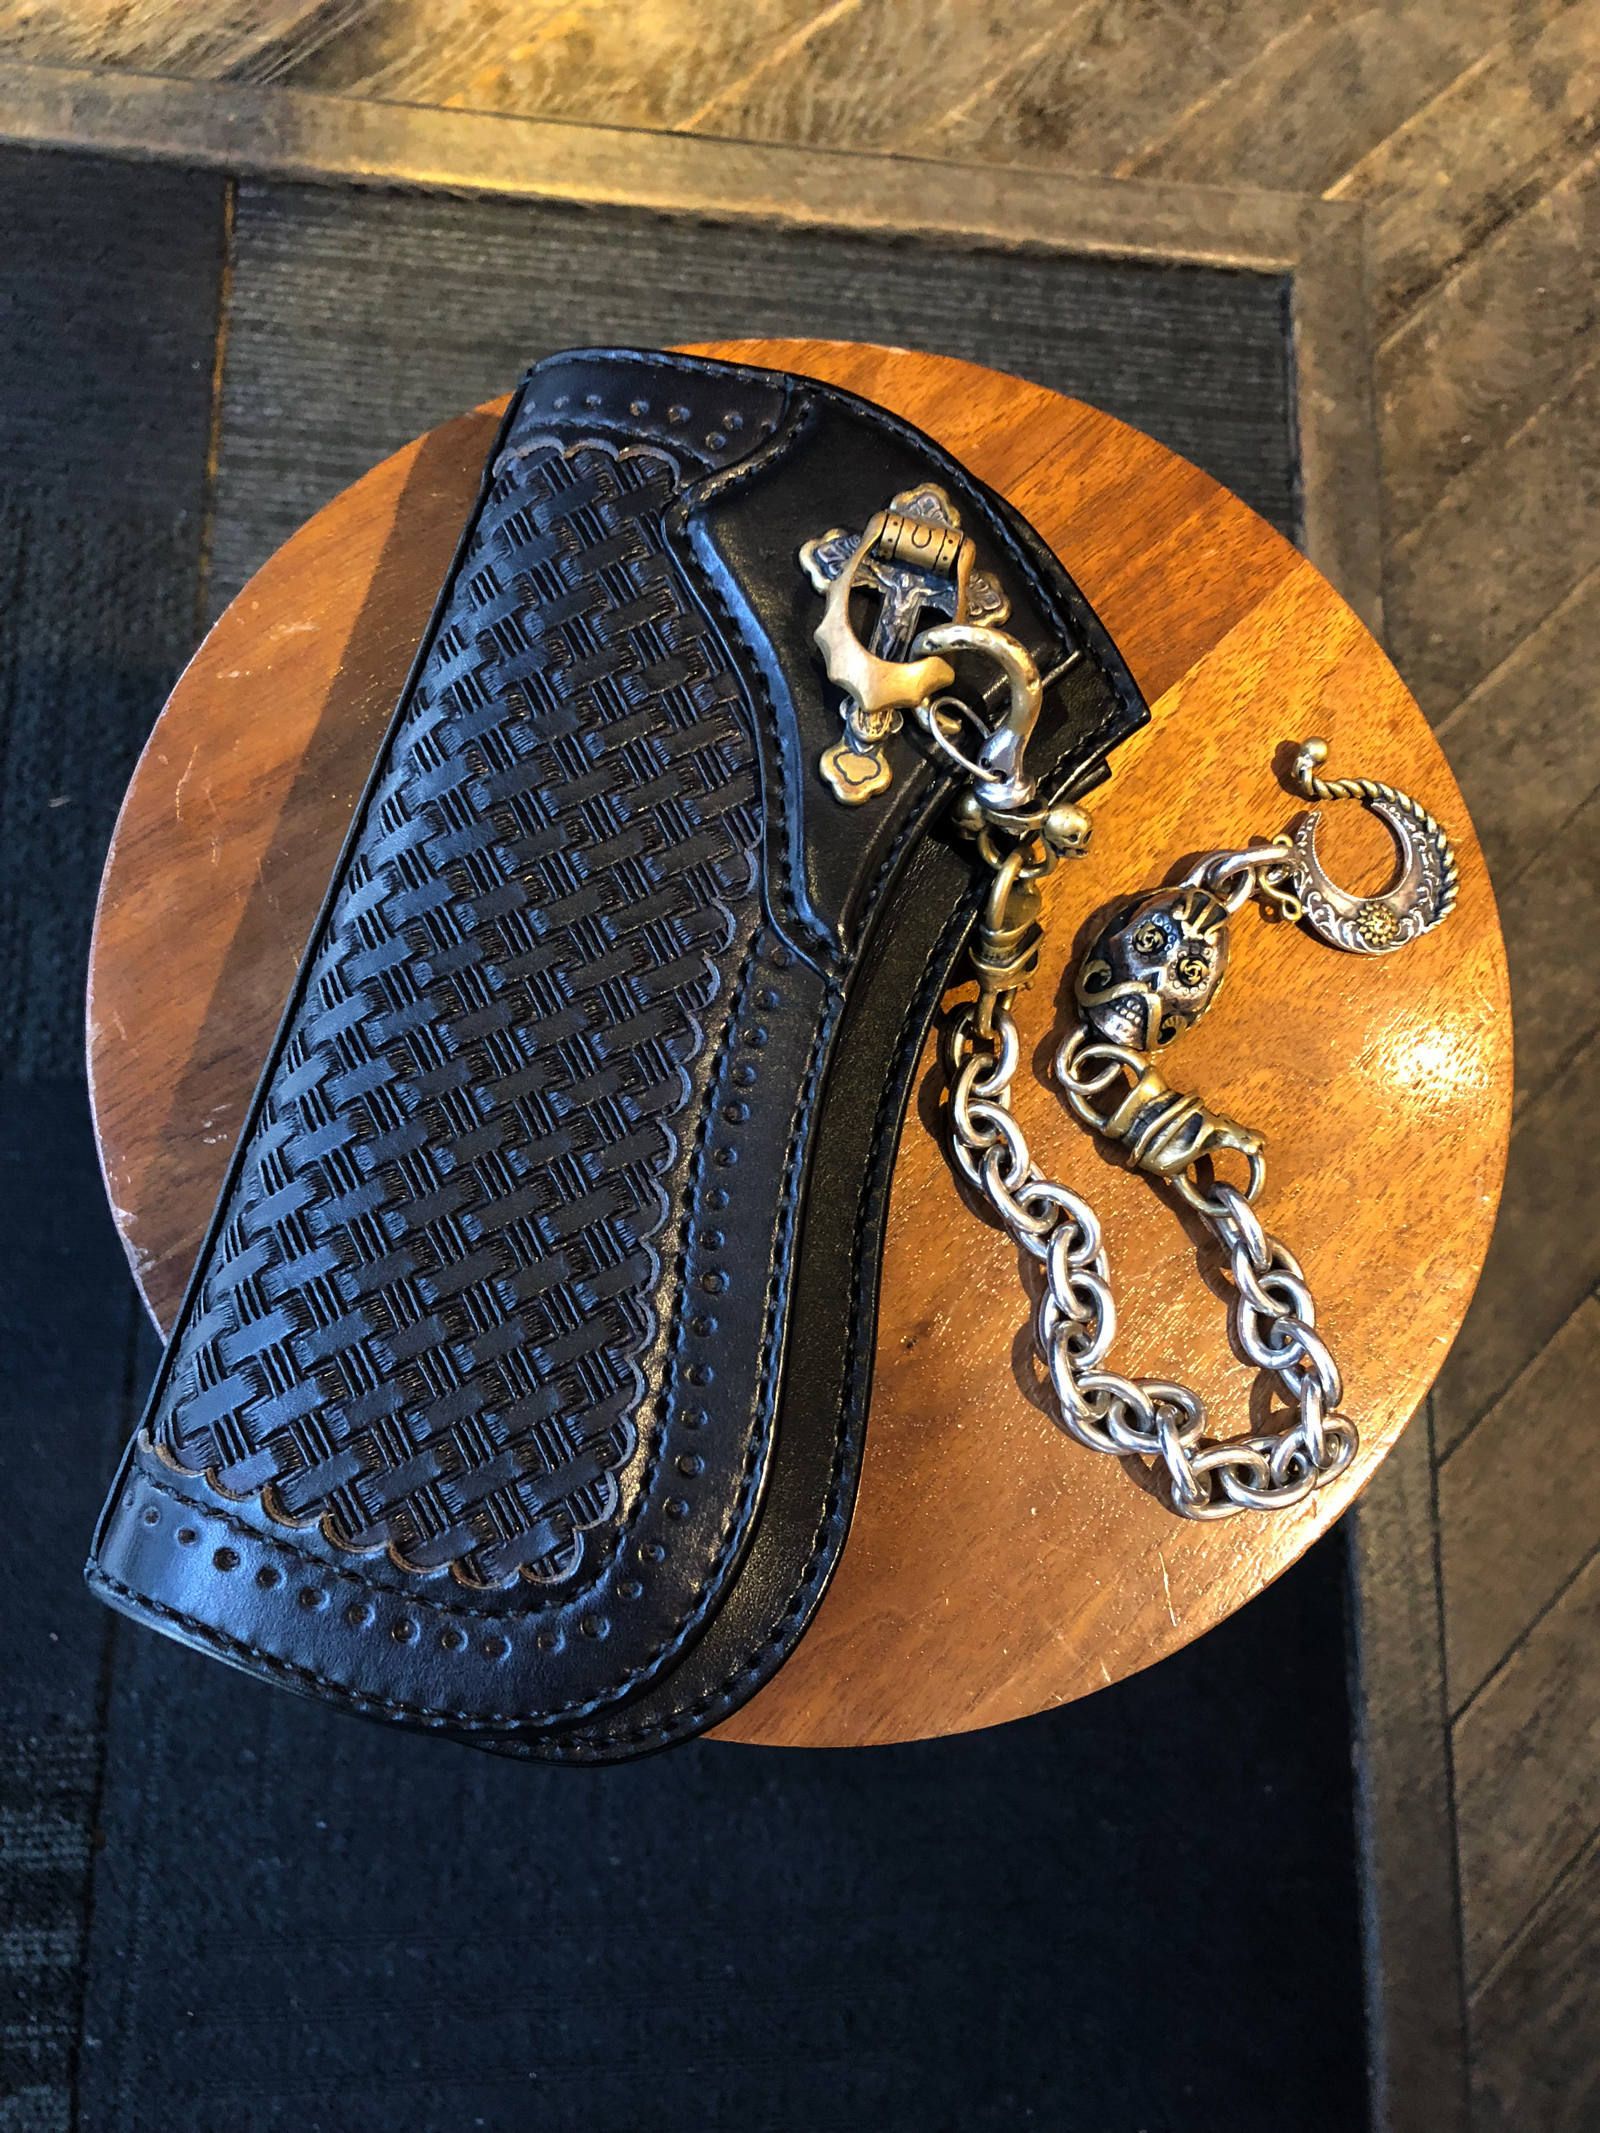 galcia× ATELIER CHERRY WALLET BASKET / ガルシア アトリエチェリー ウォレット 真鍮 シルバー (BRASS &  SILVER PARTS)